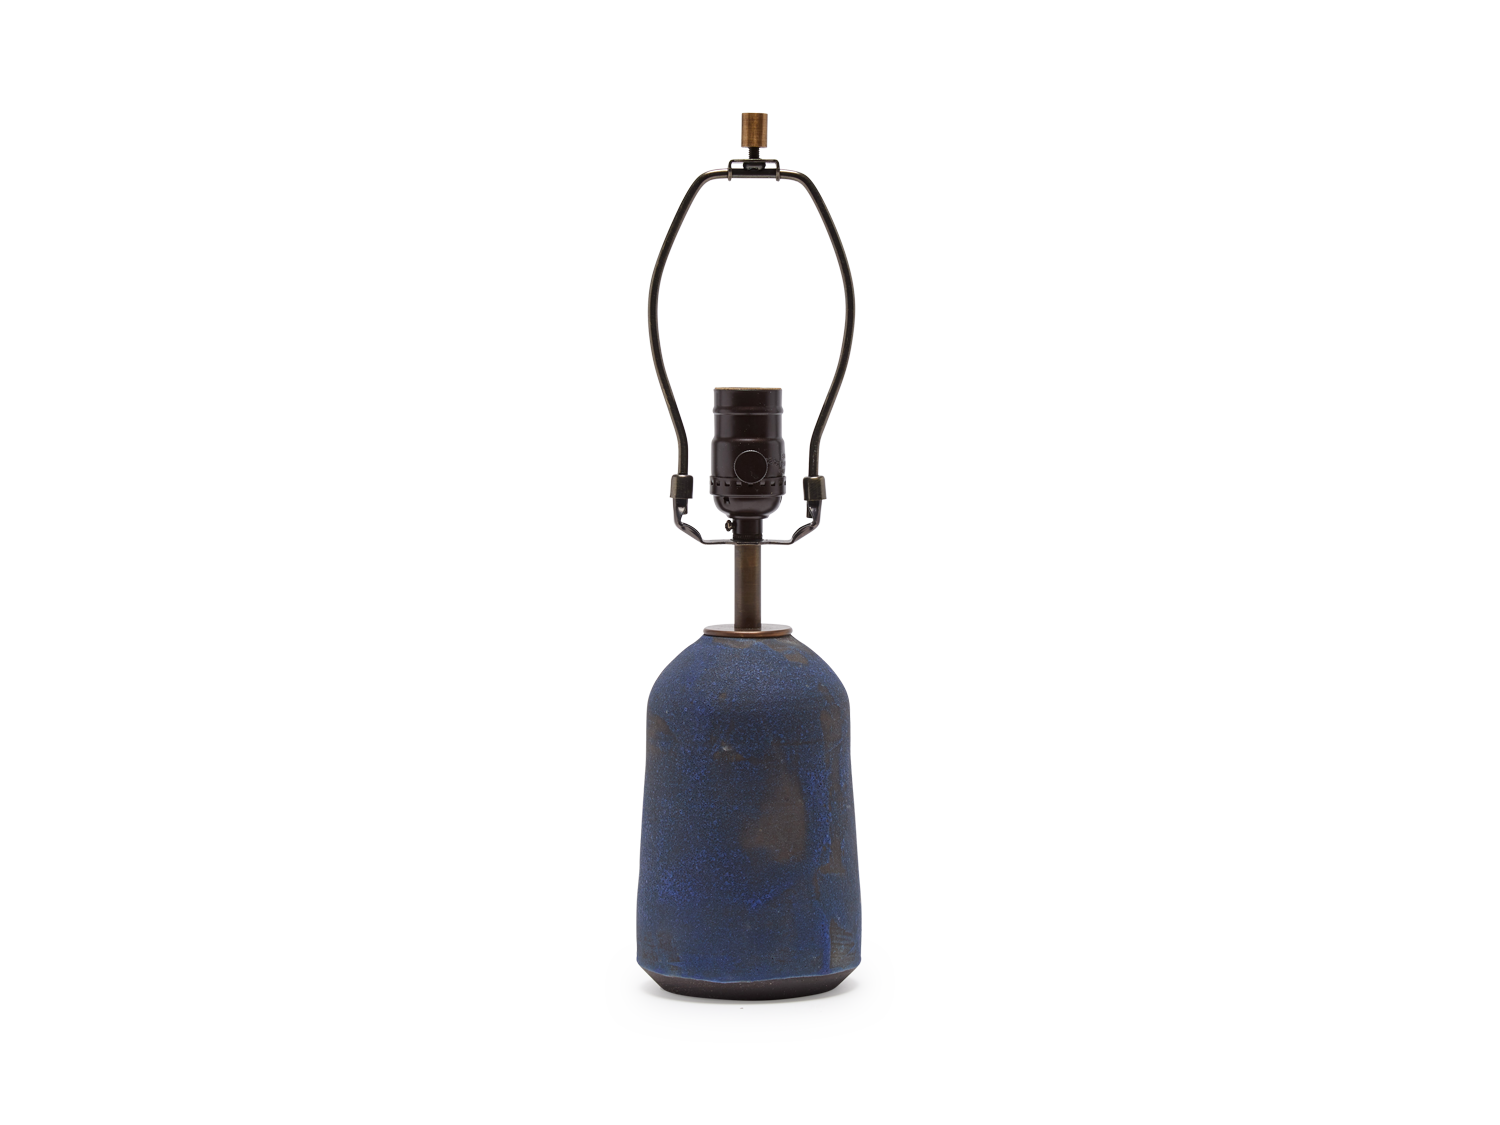 Willow Lamp - Dry Matte Blue